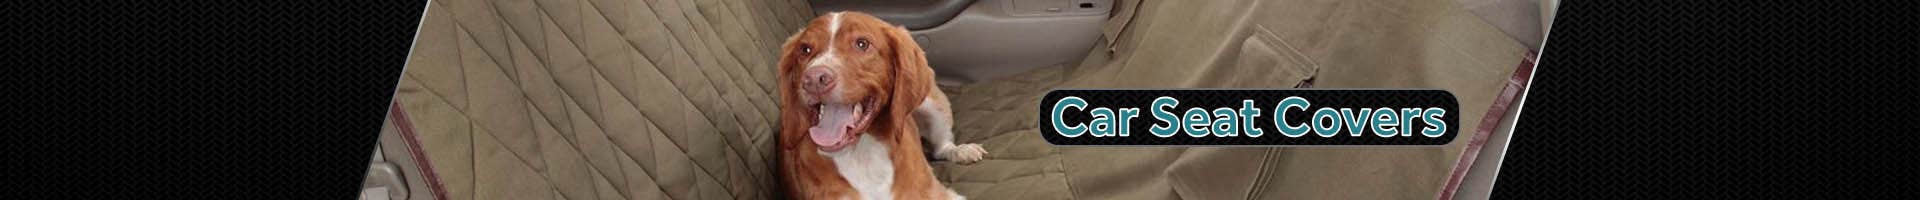 Car Seat Covers for Dogs